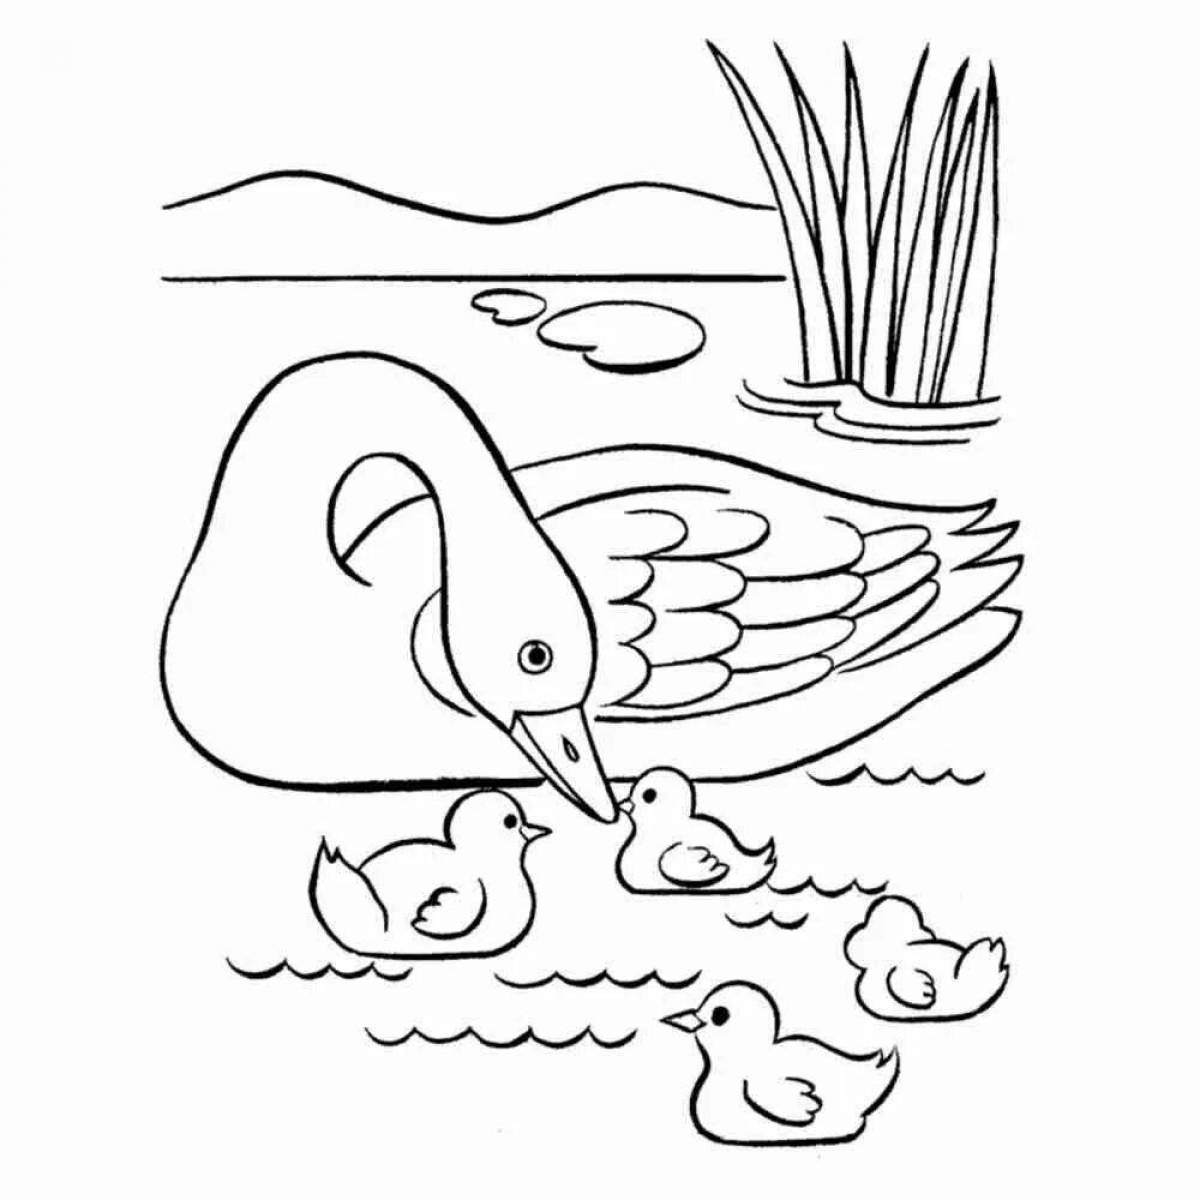 Colourful coloring swan lake for the little ones